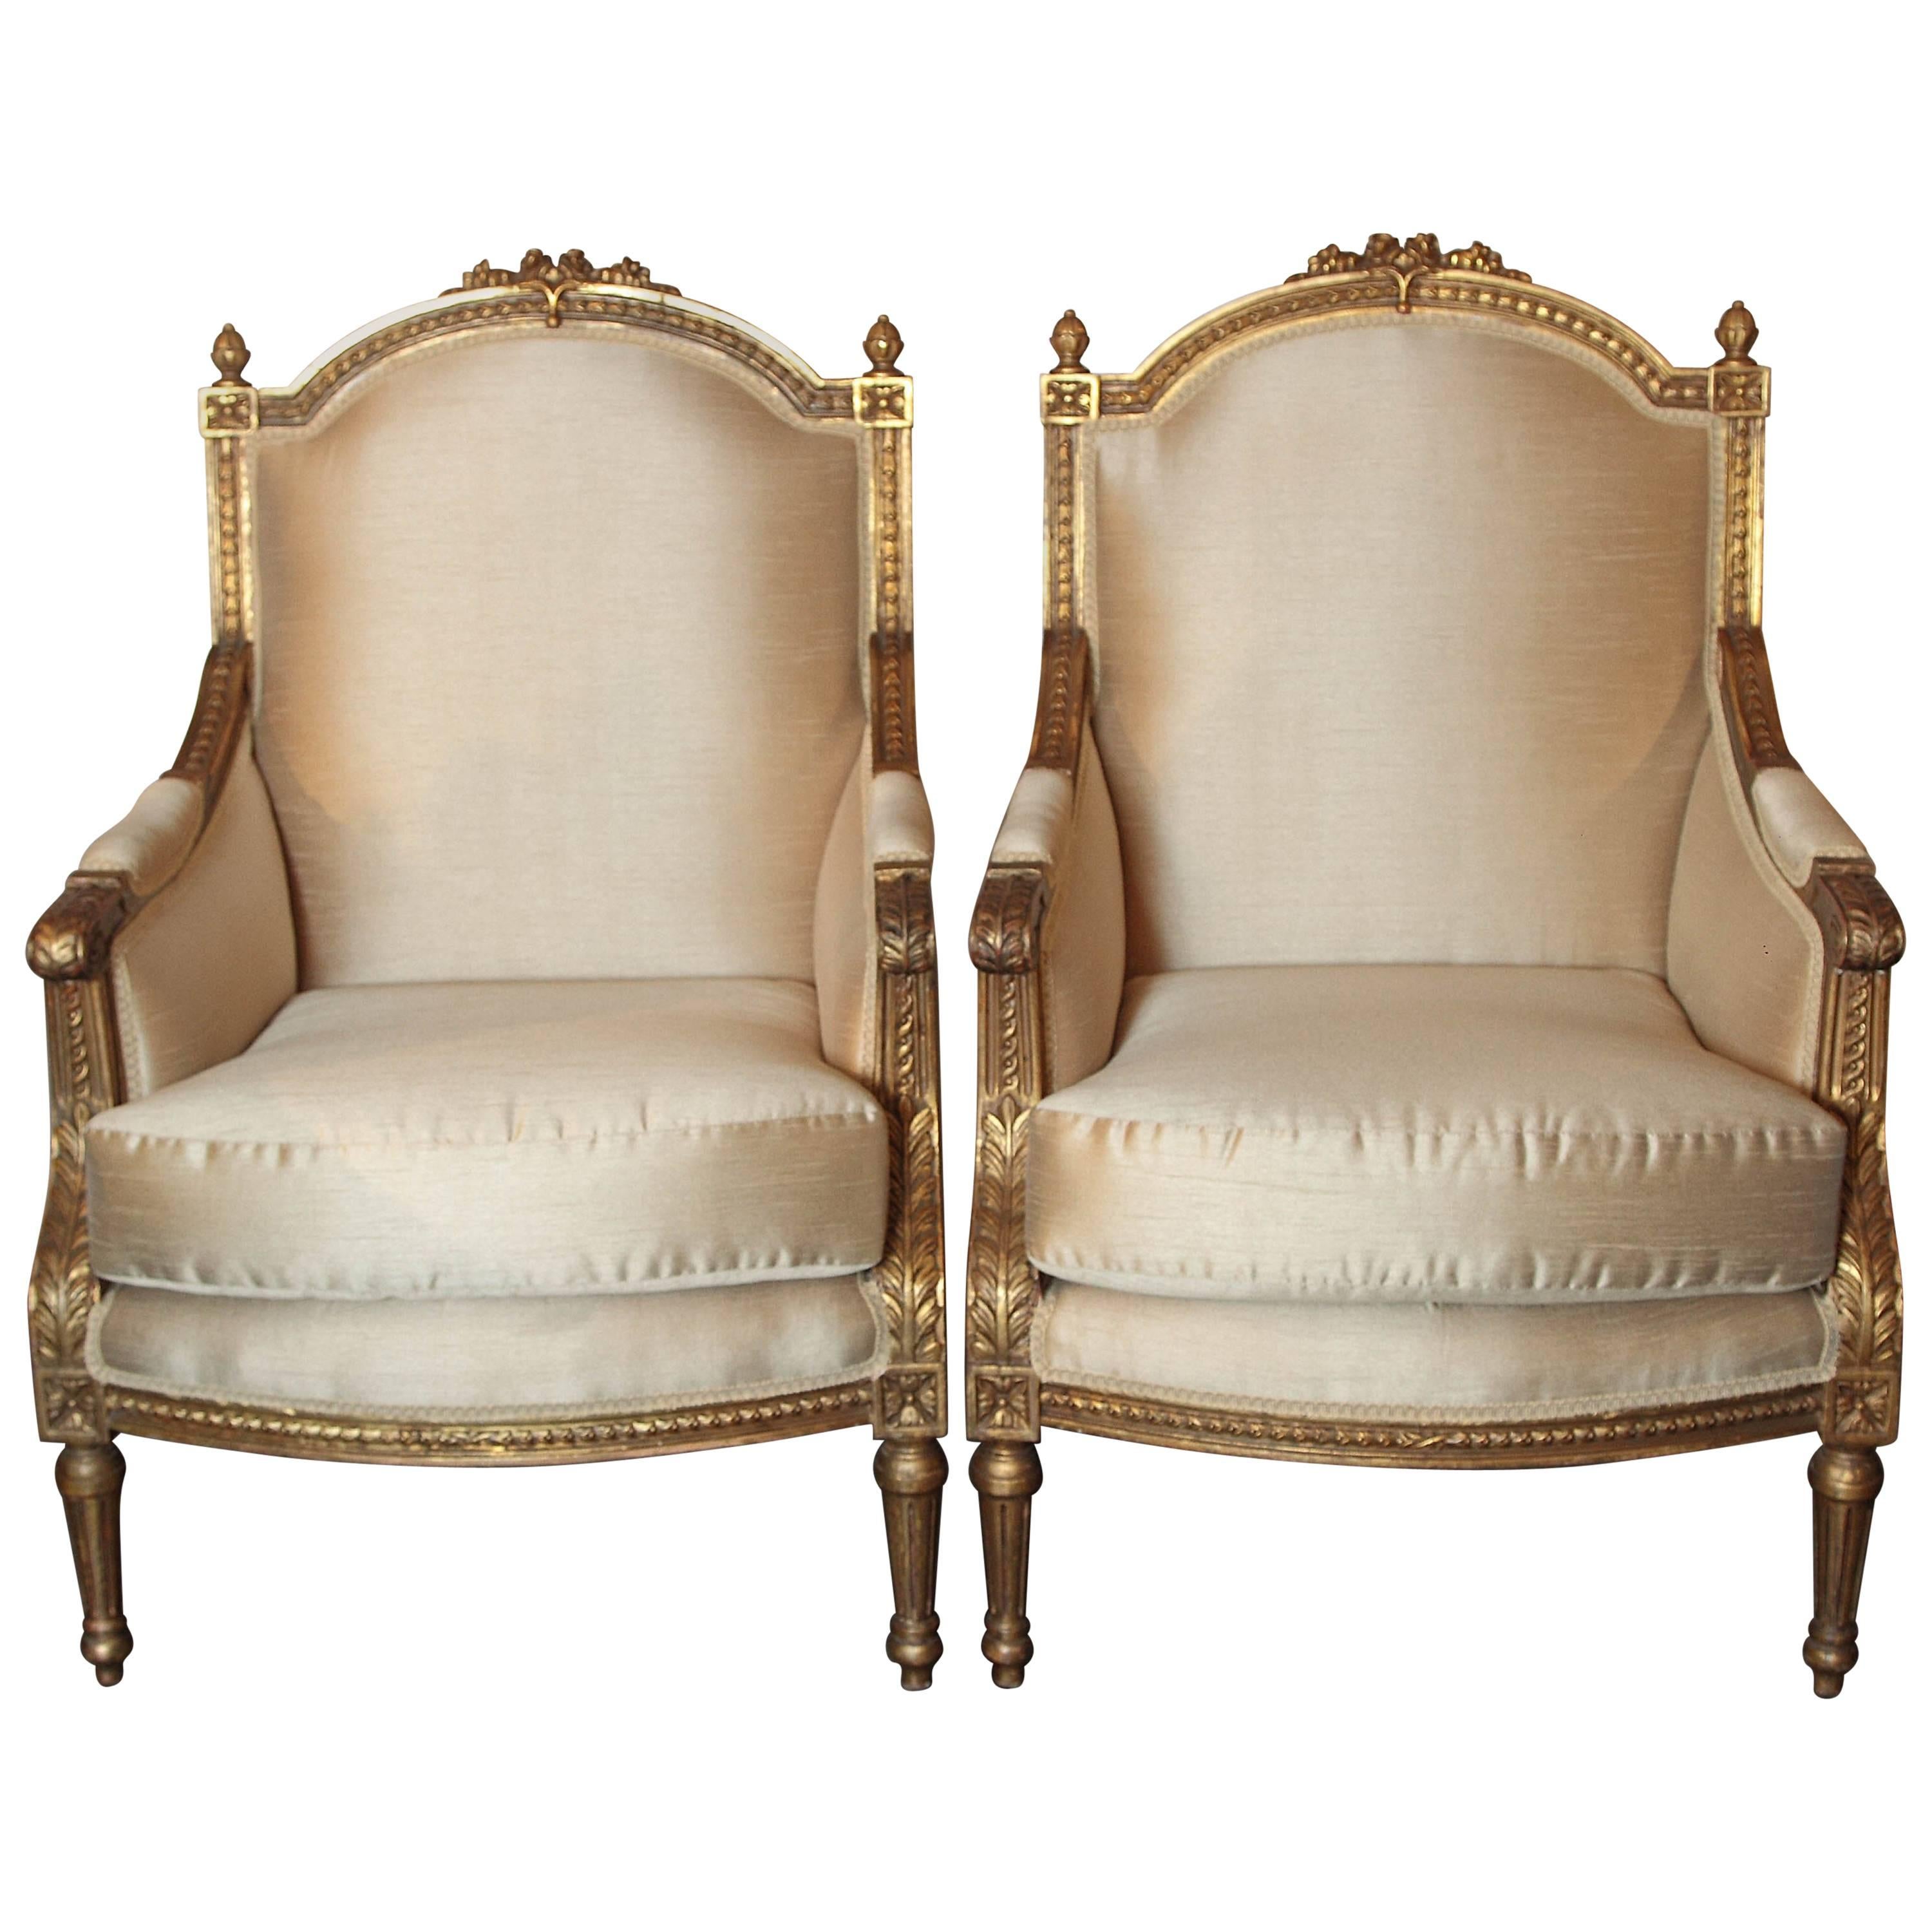 Pair of Late 19th Century French Gilt Carved Louis XVI Bergeres